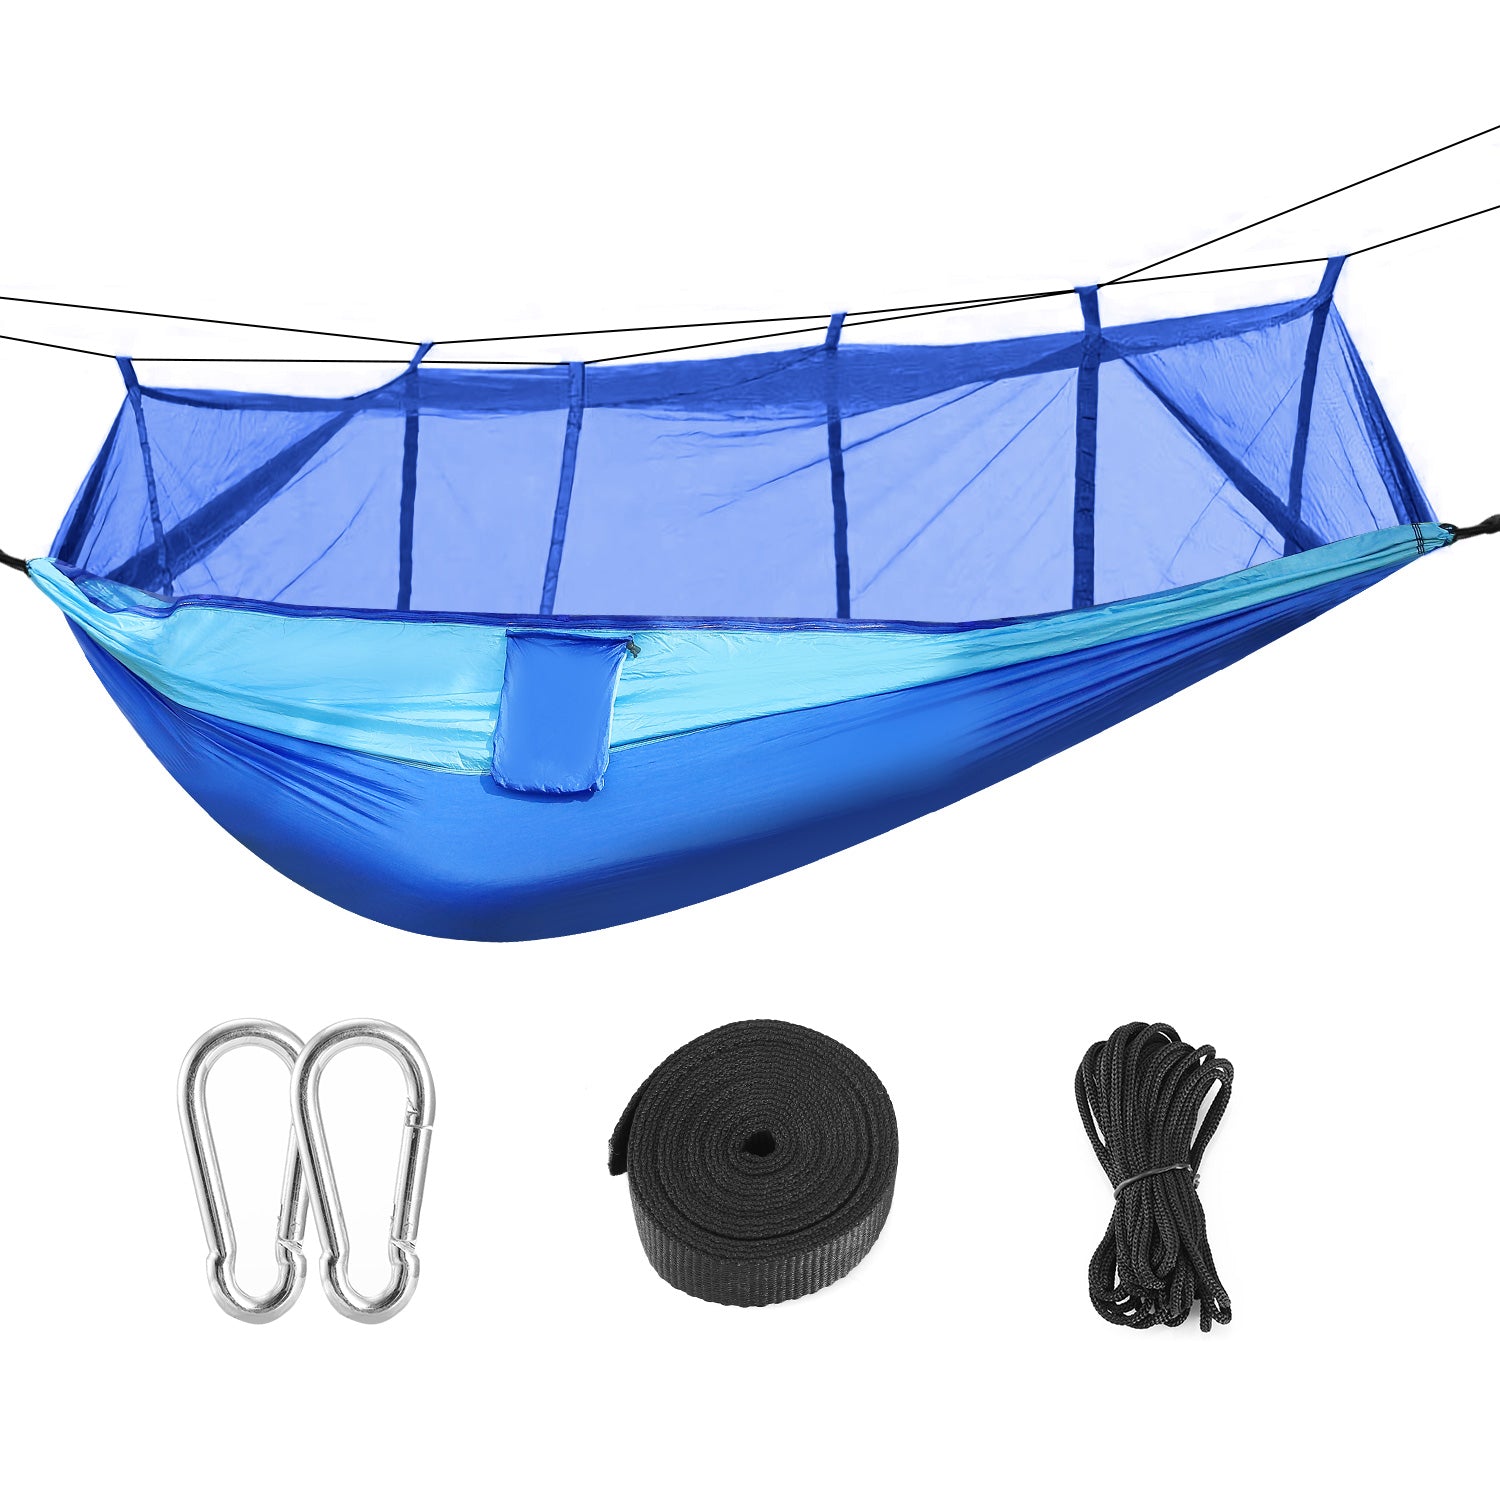 iMounTEK Camping Hammock with Mosquito Net 2 People Portable Hiking Tent with Strap Hook Carry Bag 102x55in - Reversible, breathable, Lightweight, Ripstop Nylon -  Blue